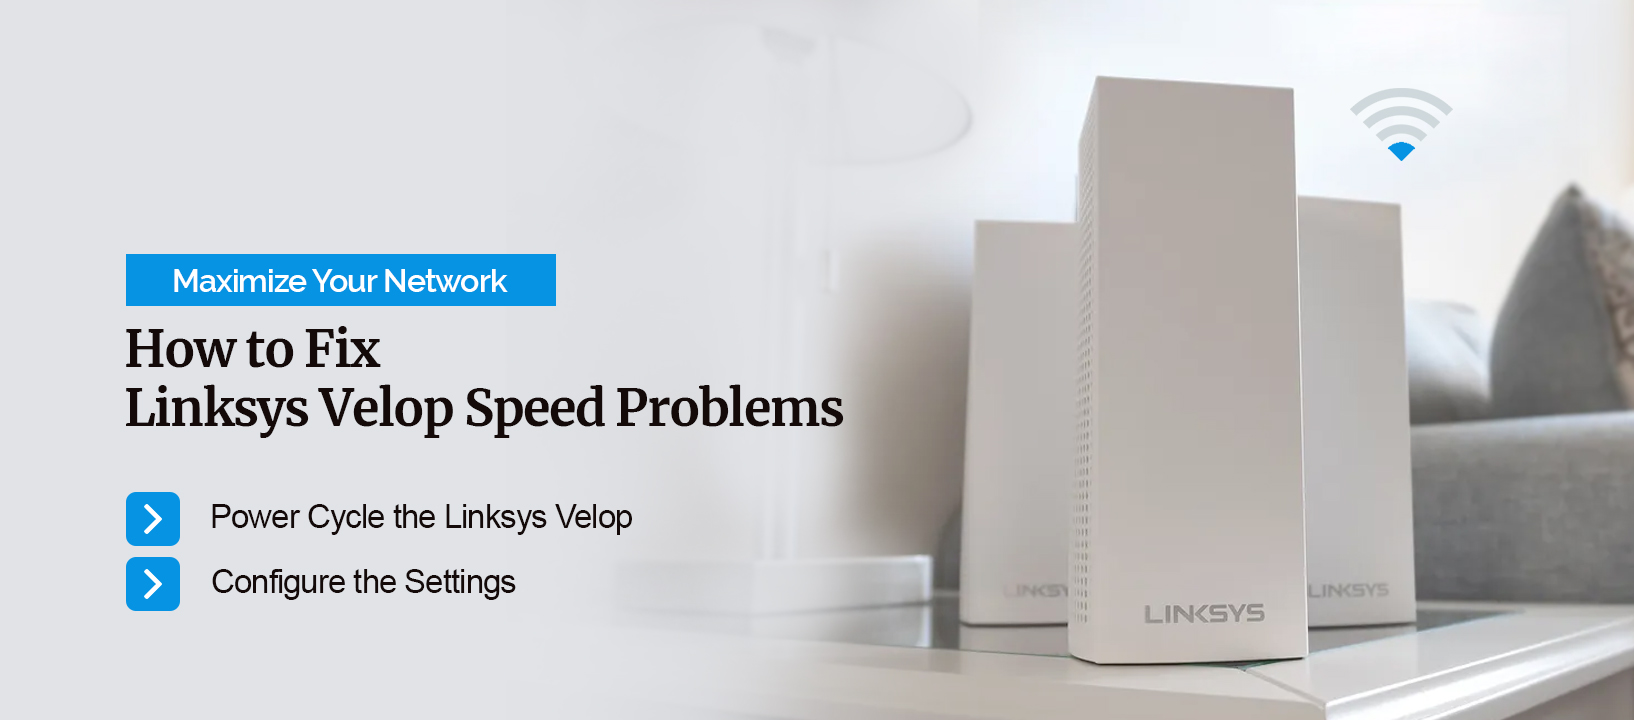 How to Fix Linksys Velop Not Getting Full Speed